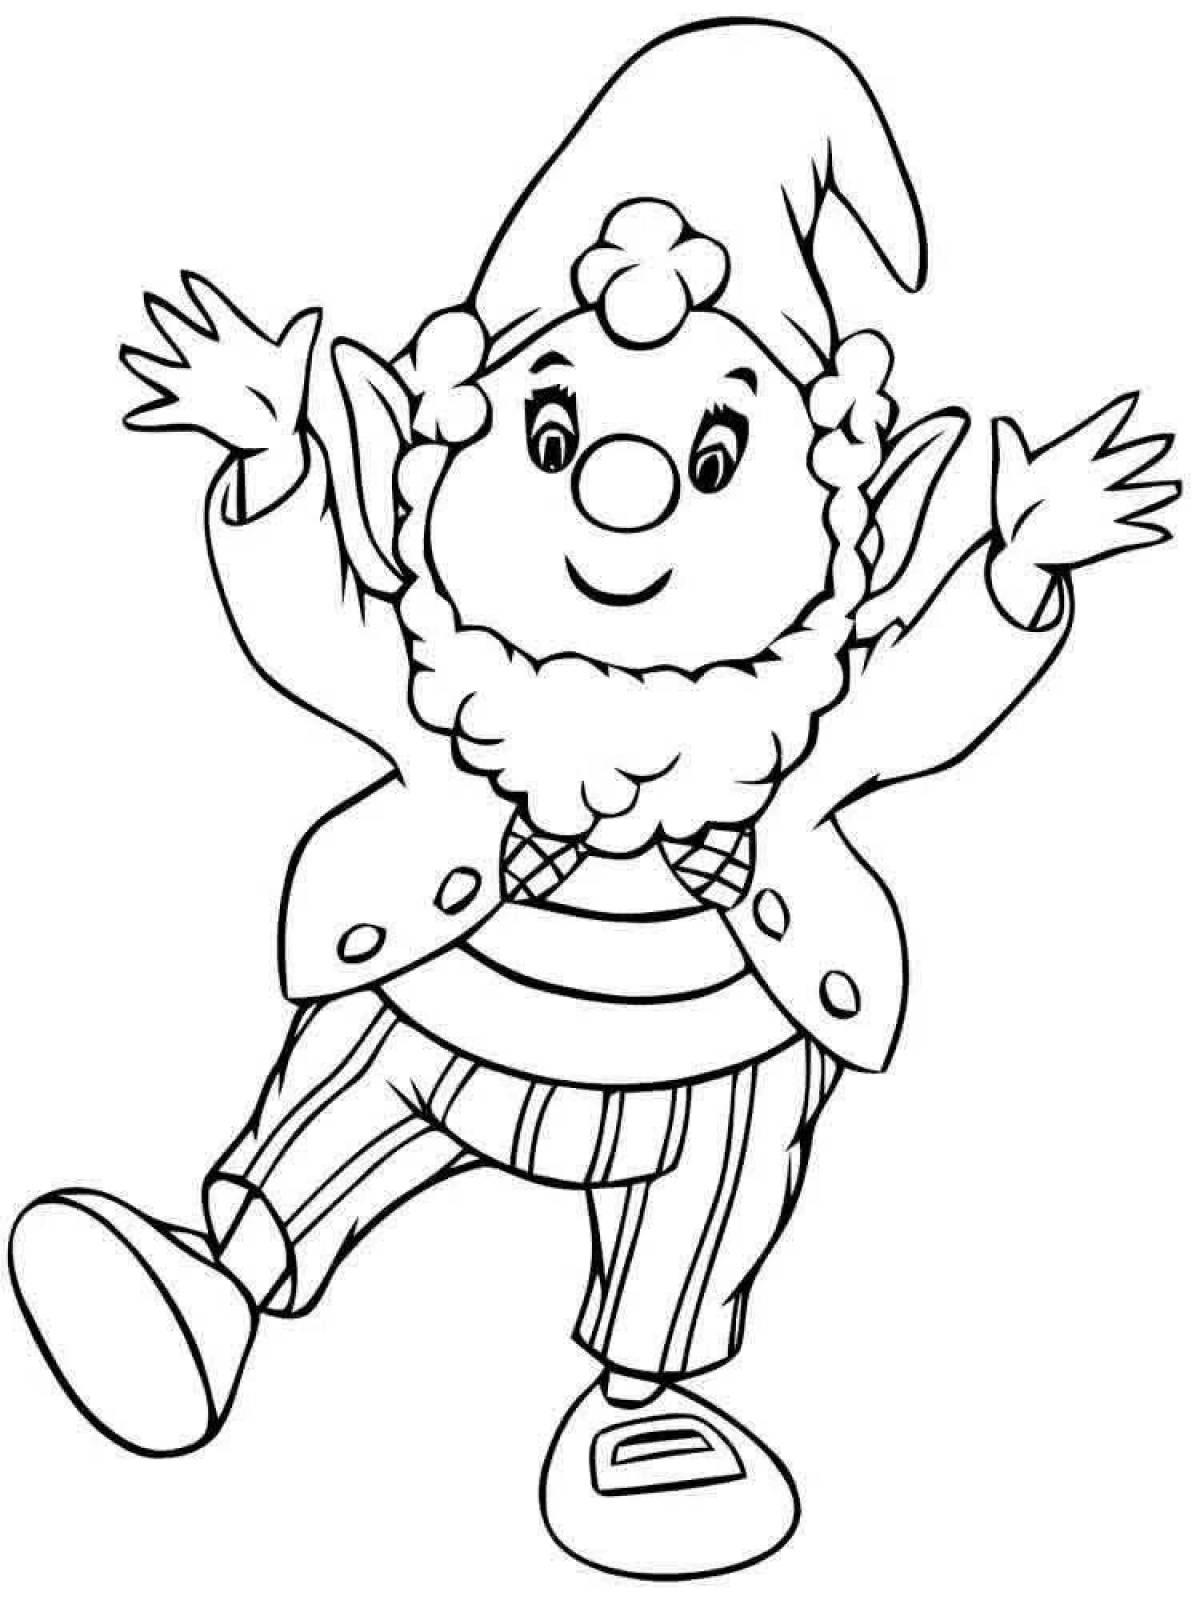 Glorious dwarf coloring page